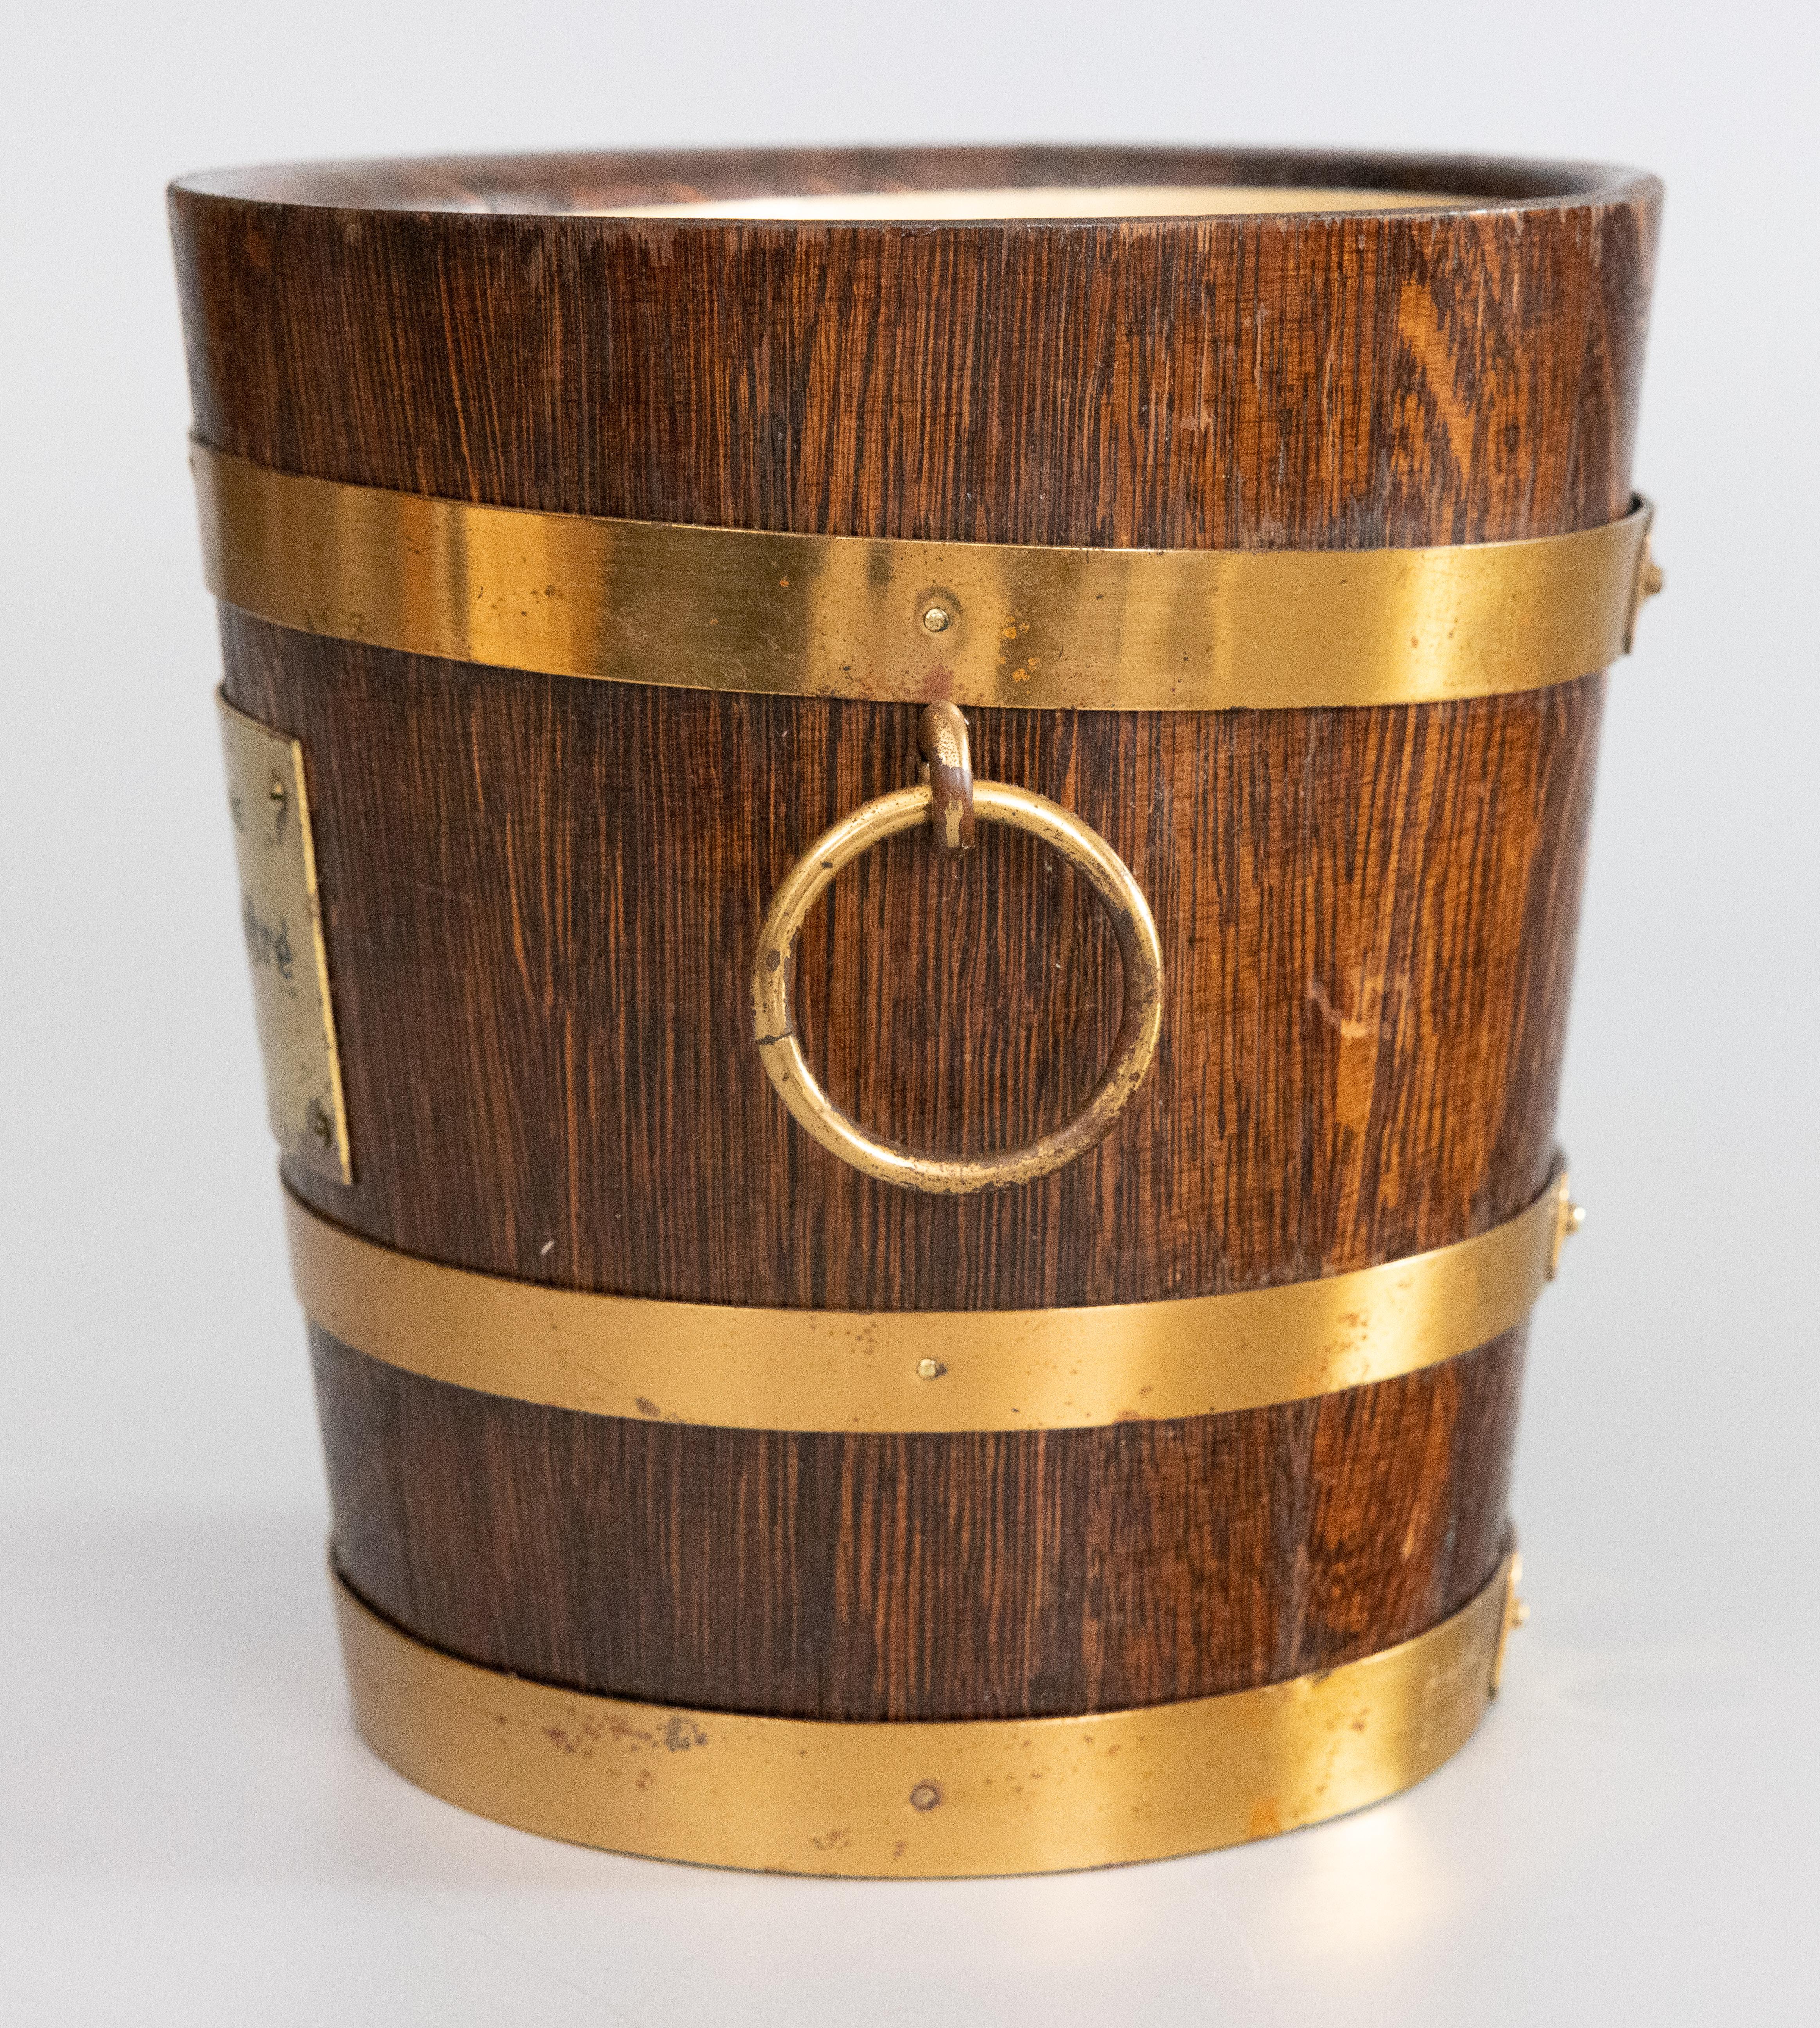 A superb French oak & brass coopered barrel wine cooler champagne ice bucket with removable insert made by Géraud Lafitte c. 1930. Maker's mark on lower brass band. This fine quality ice bucket is solid and well made exhibiting excellent